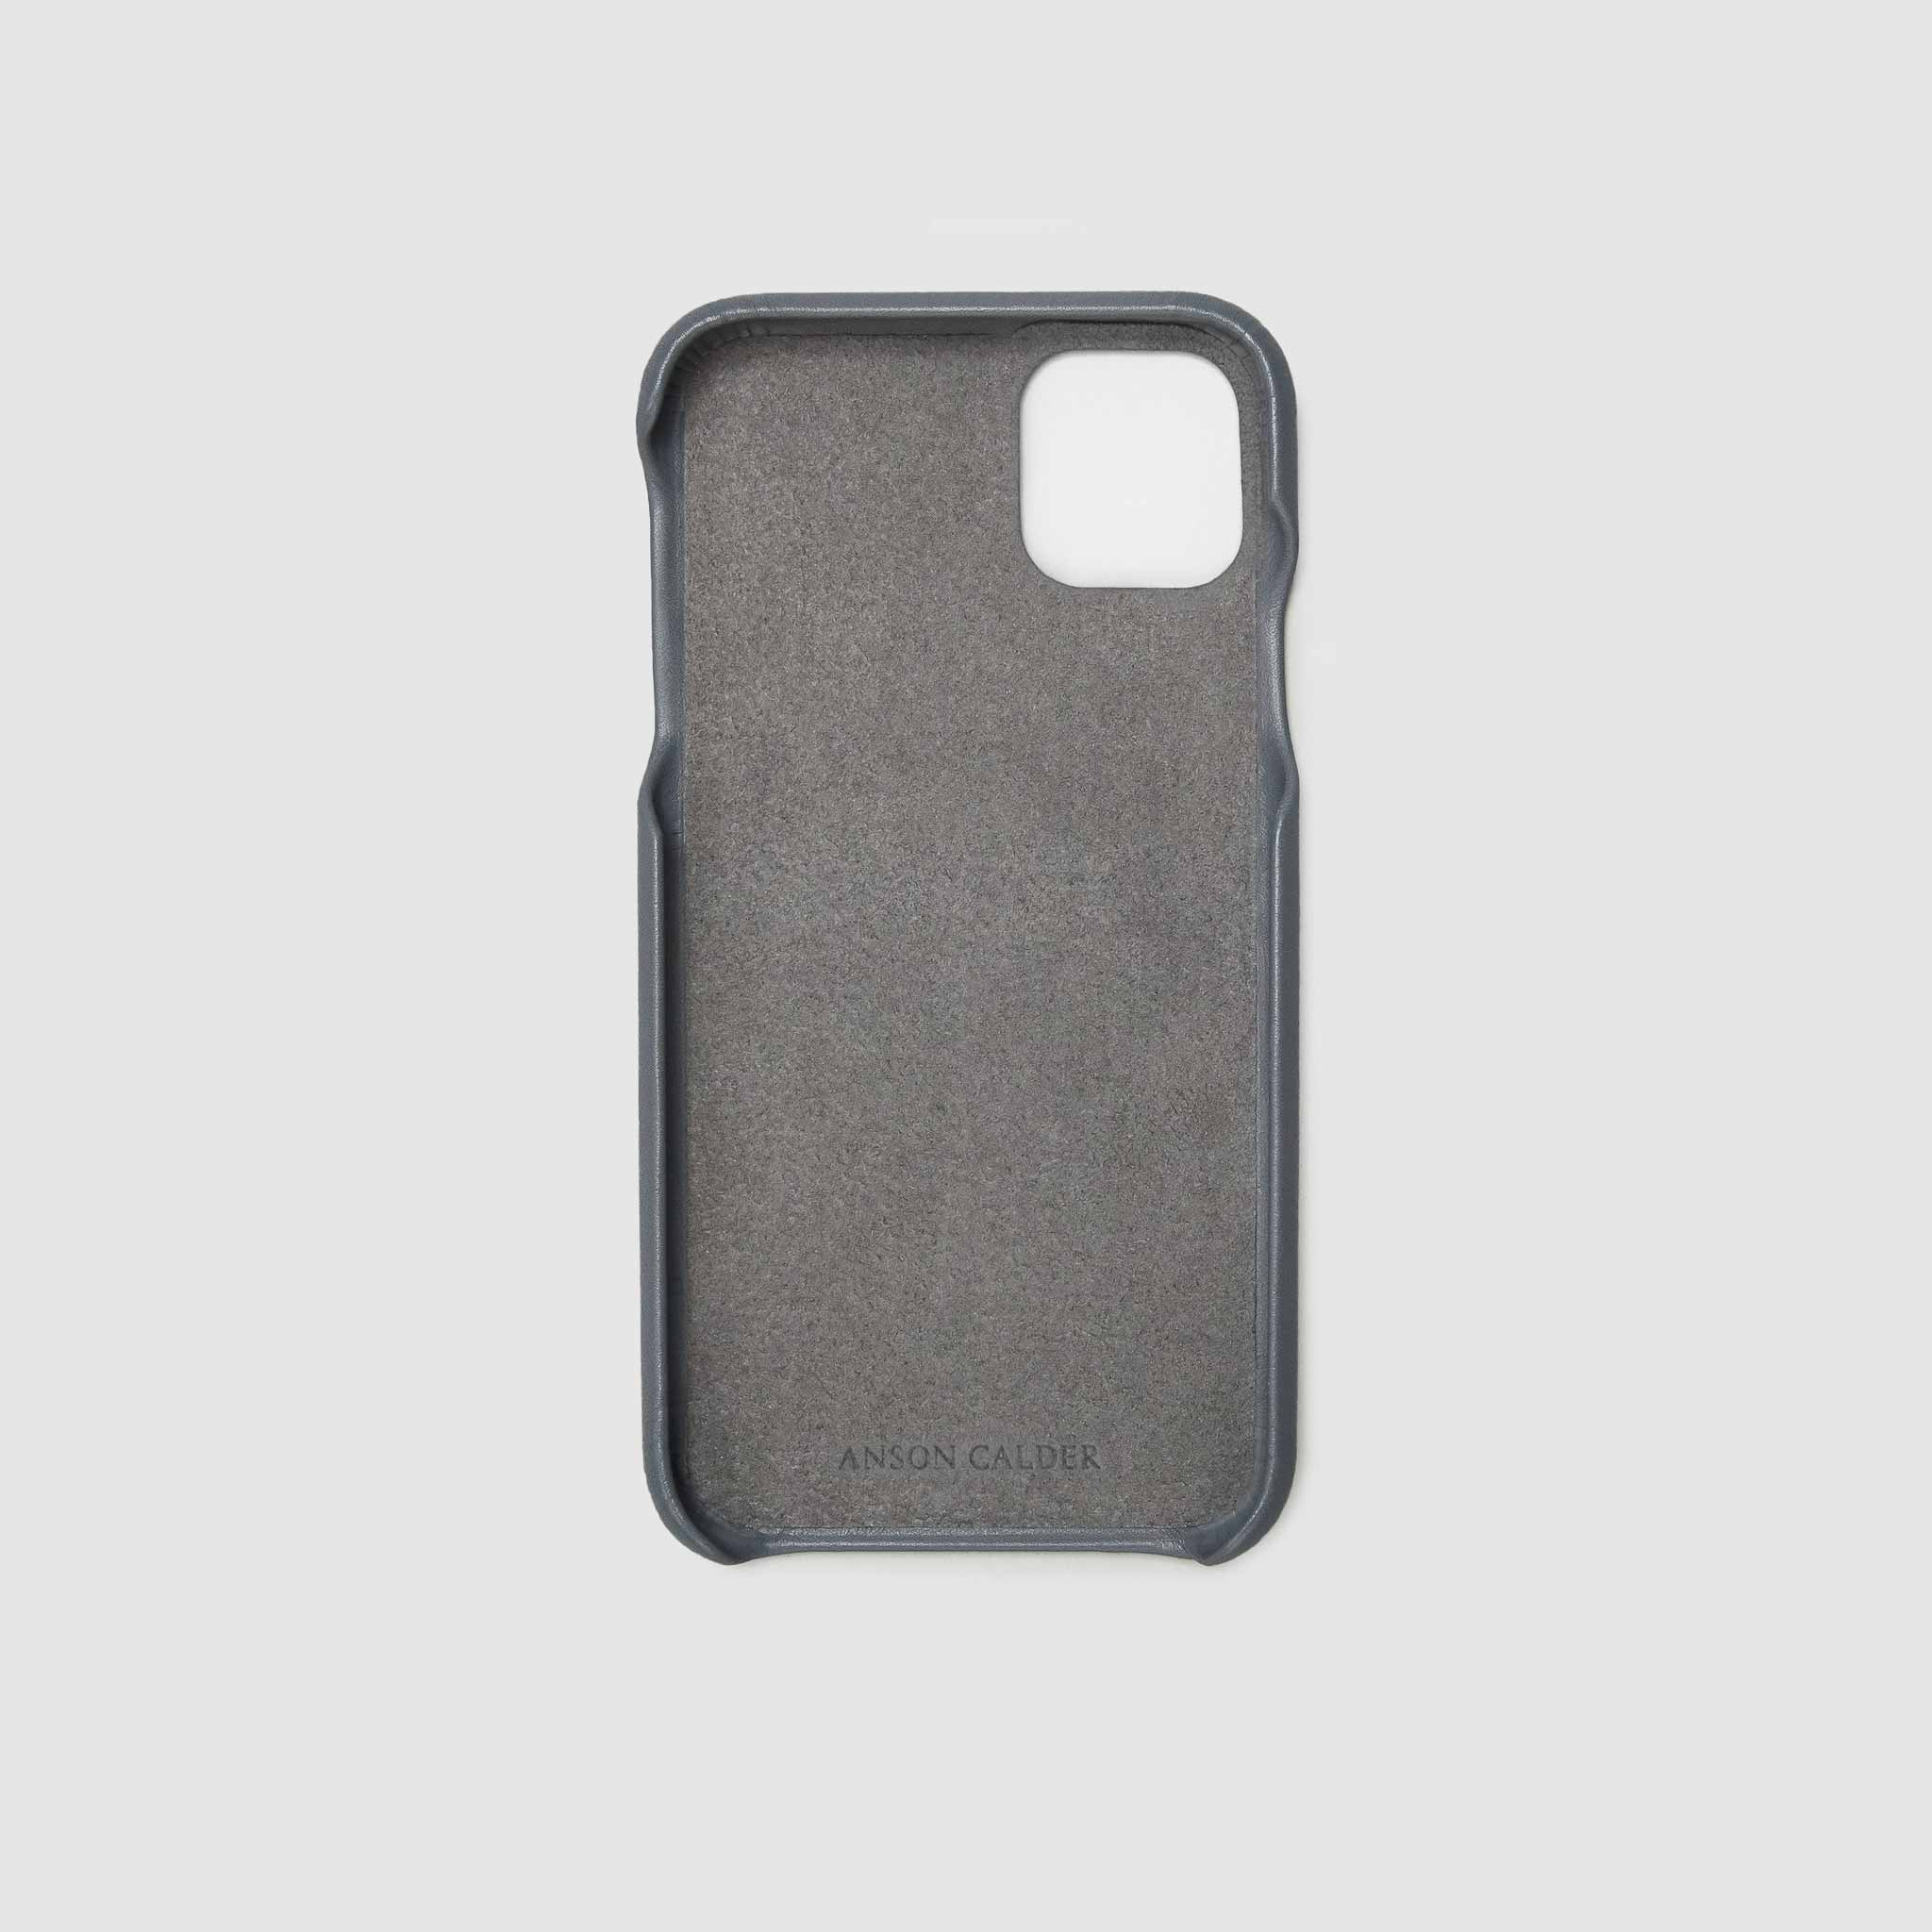 anson calder iphone case french calfskin 11 eleven pro max leather !iphone11pro-iphone11promax  _steel-grey